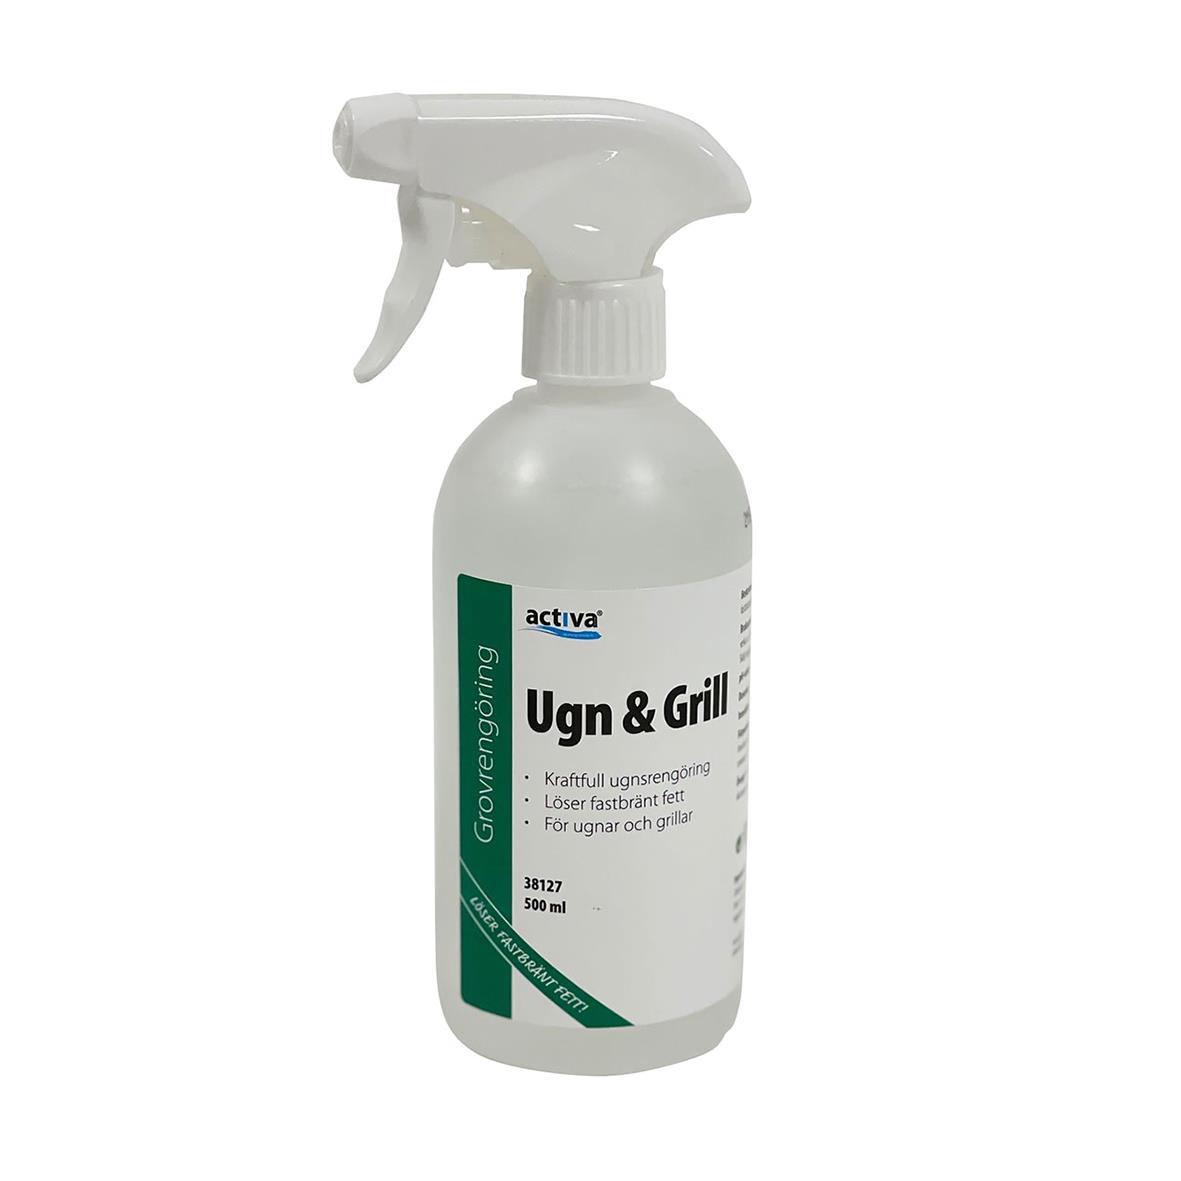 Ugns-/Grillrent Activa Ugn & Grill Spray 500ml 52080005